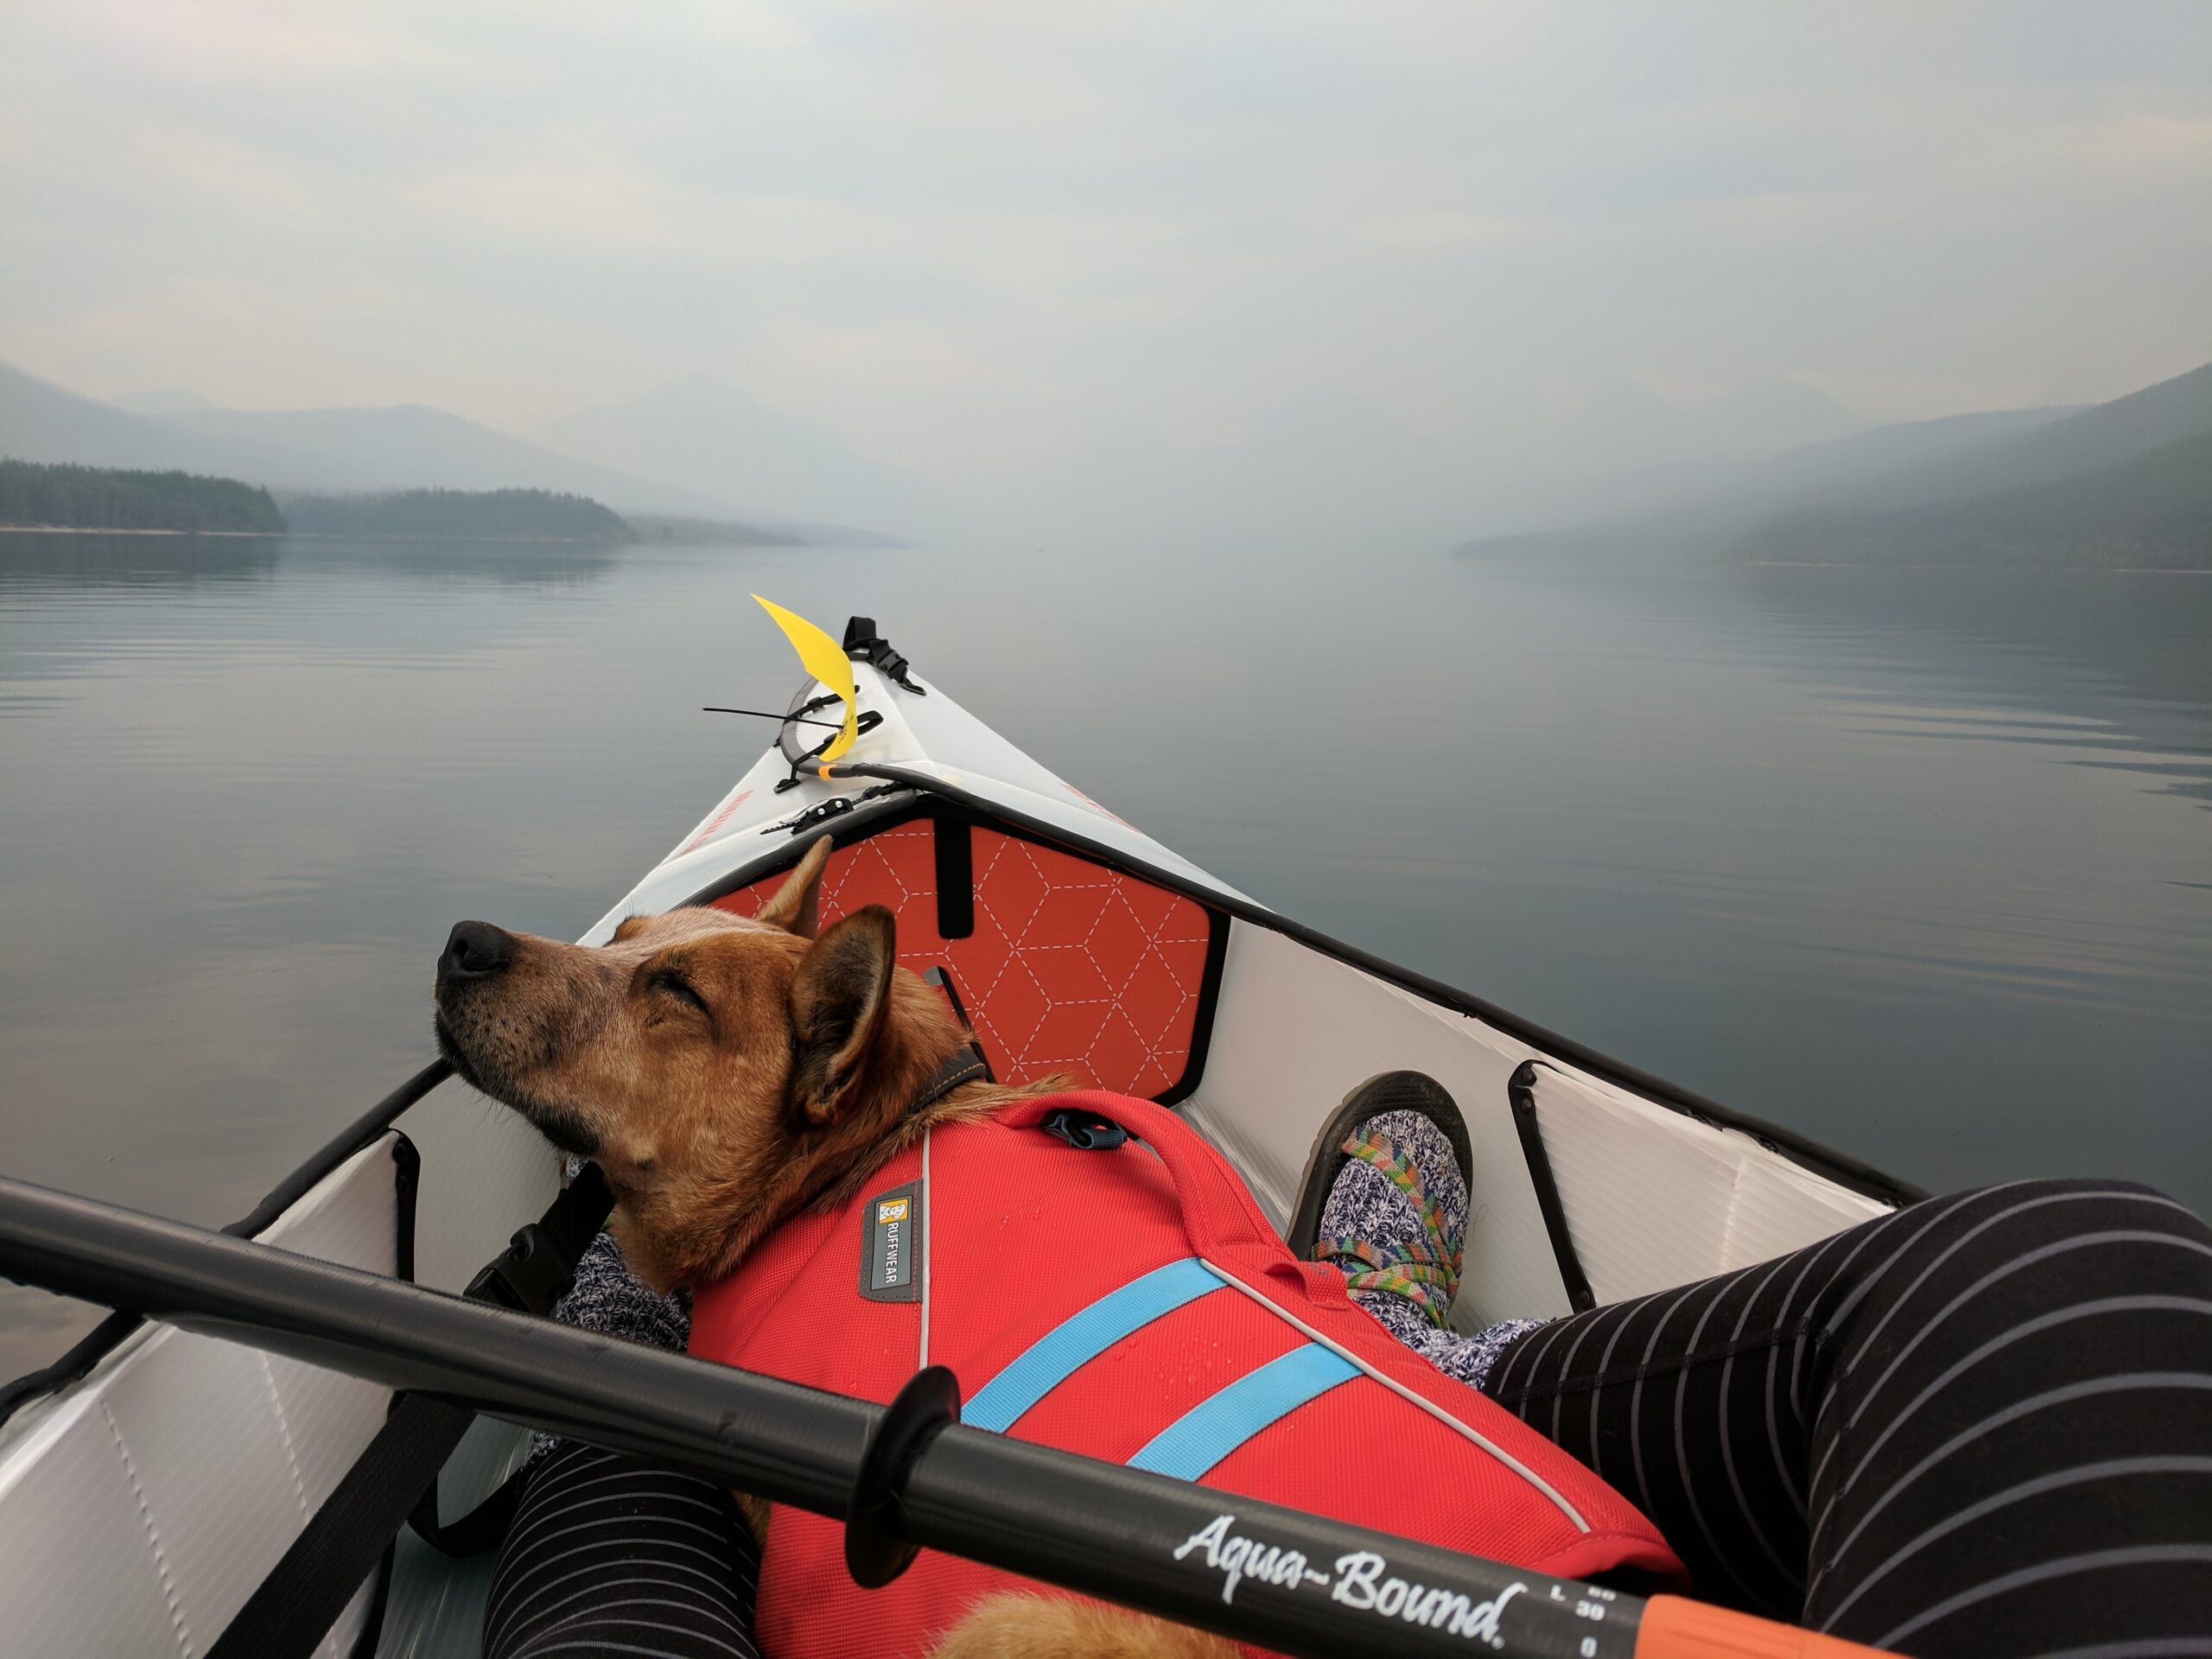 Kayaking with your dogs